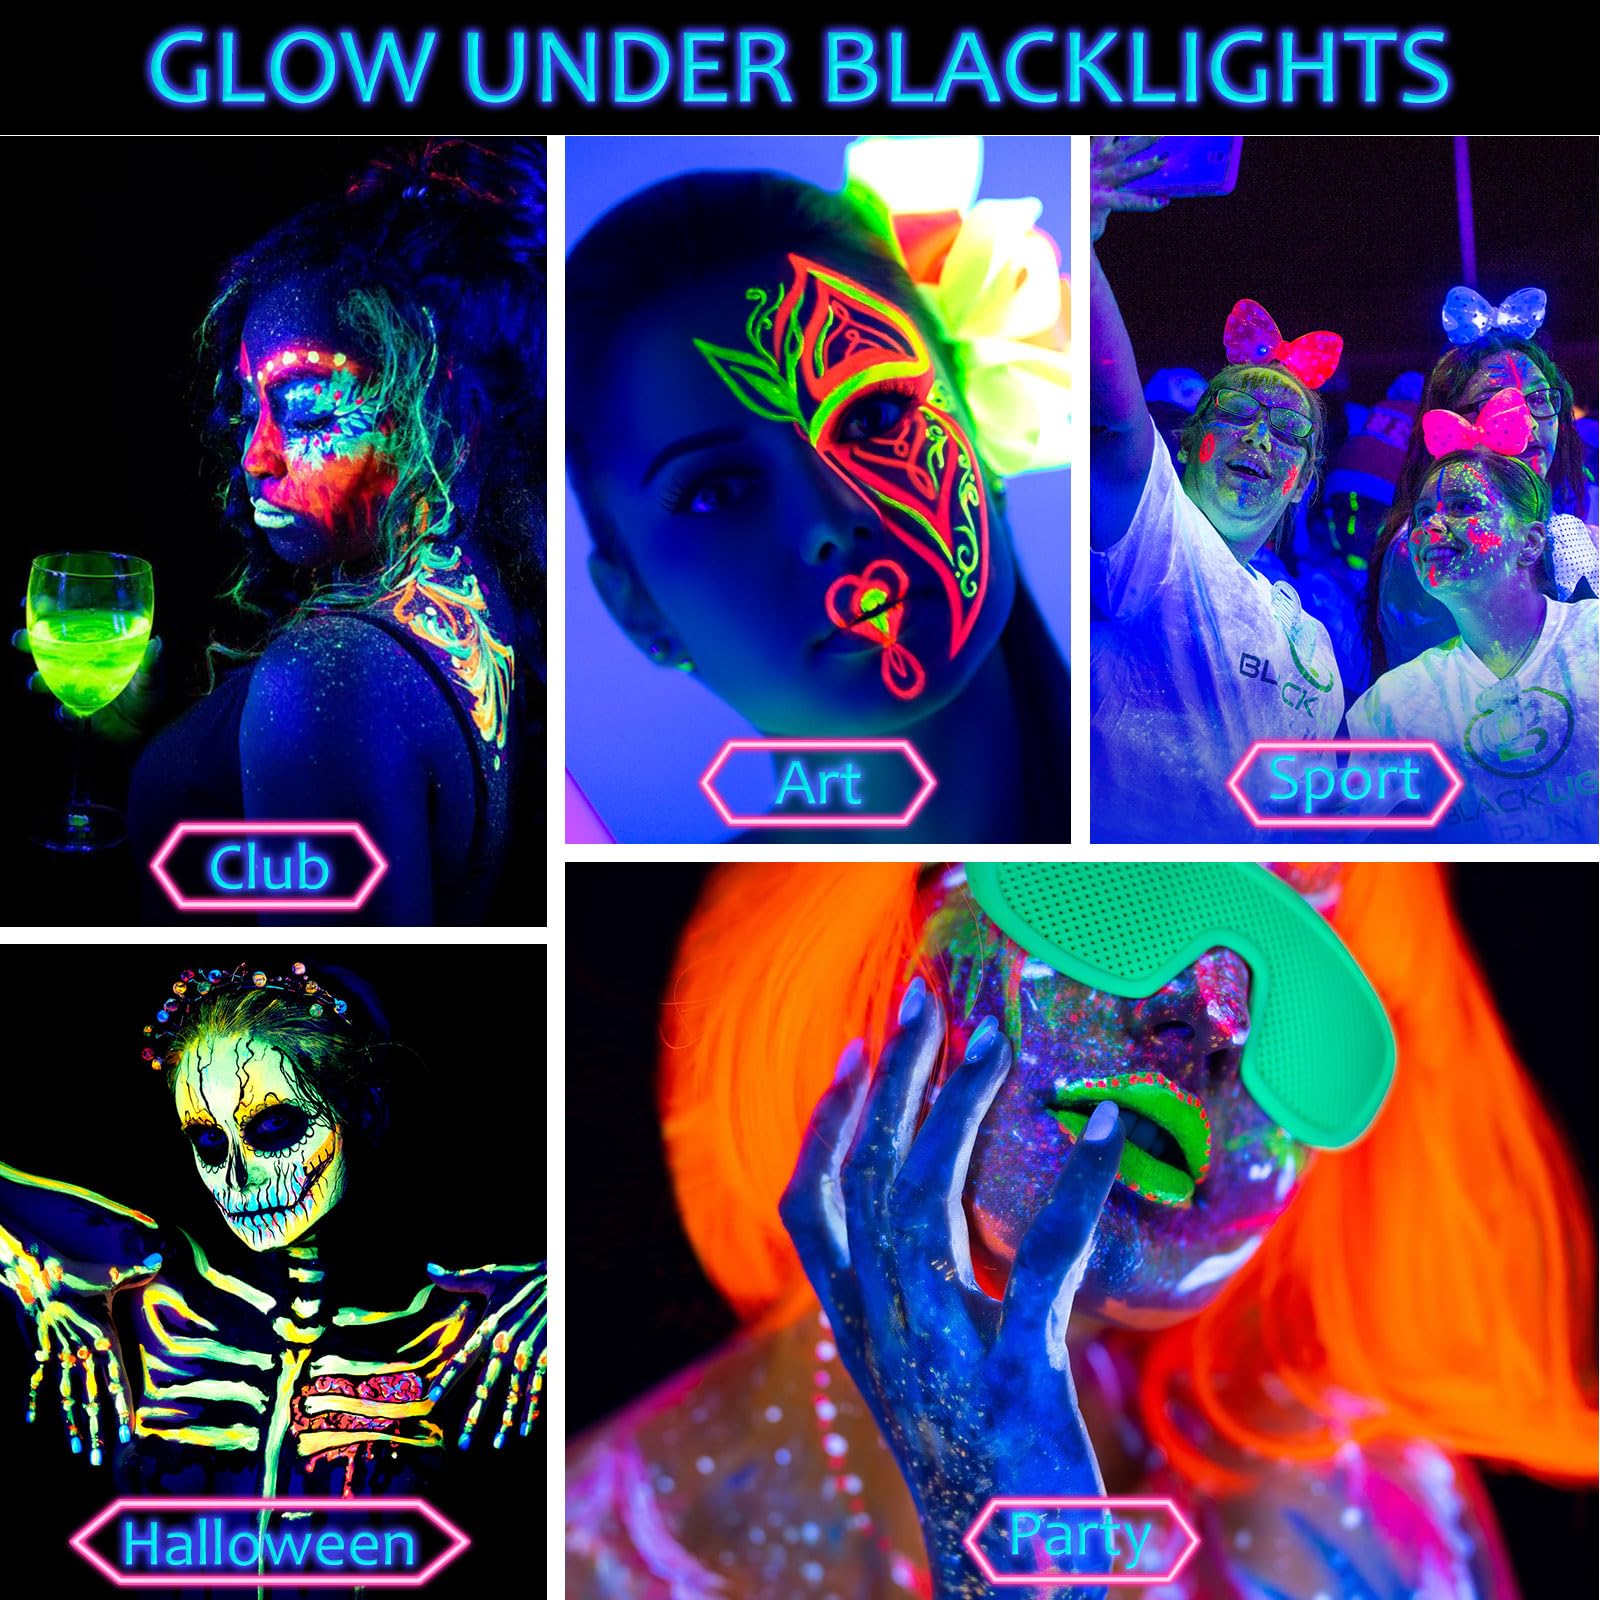 Neon Hot Pink UV Face Body Paint(30g/1oz), Water Based Blacklight Fluorescent Glow Face Body Painting Color for Music Festivals, Nights Out, Halloween, Sports and Party